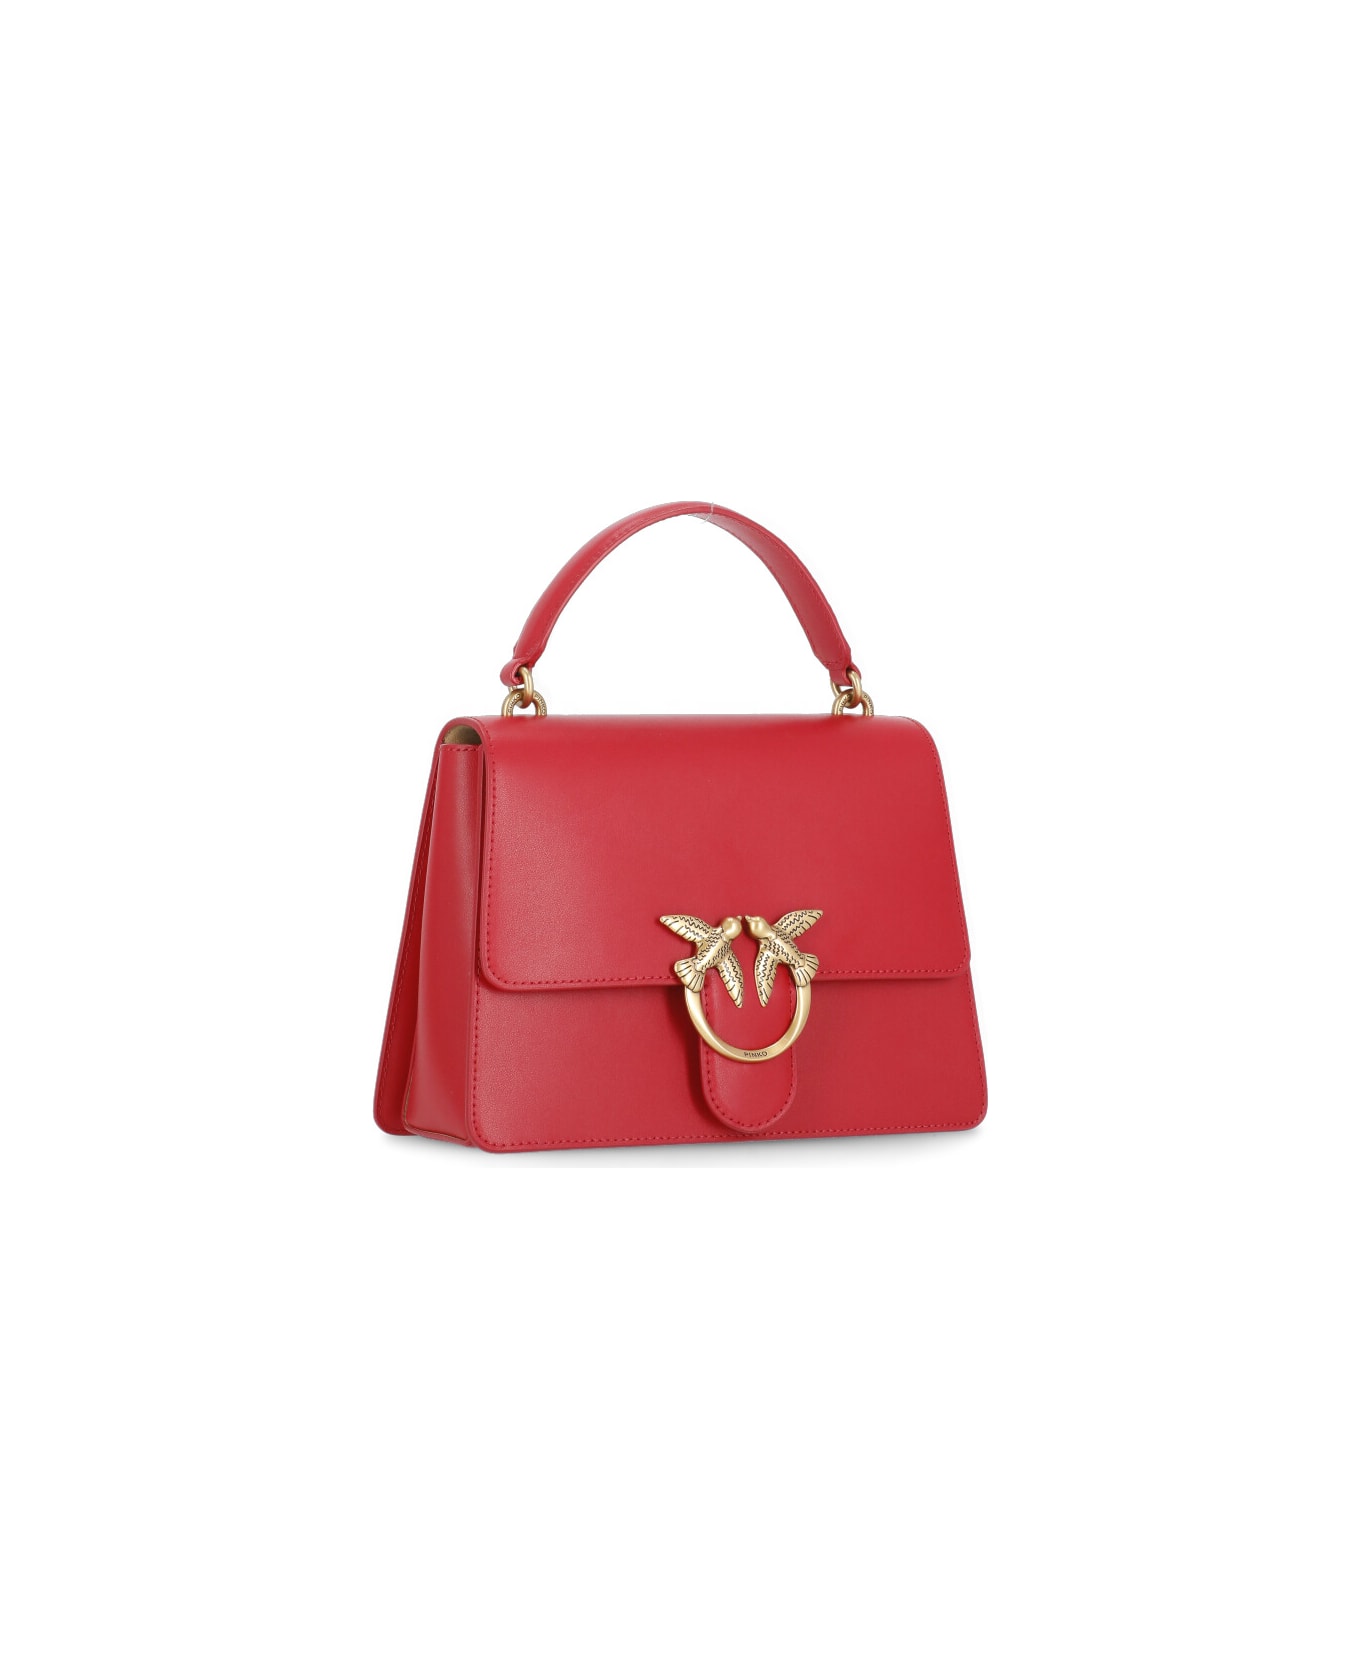 Pinko Love One Top Handle Bag - Red